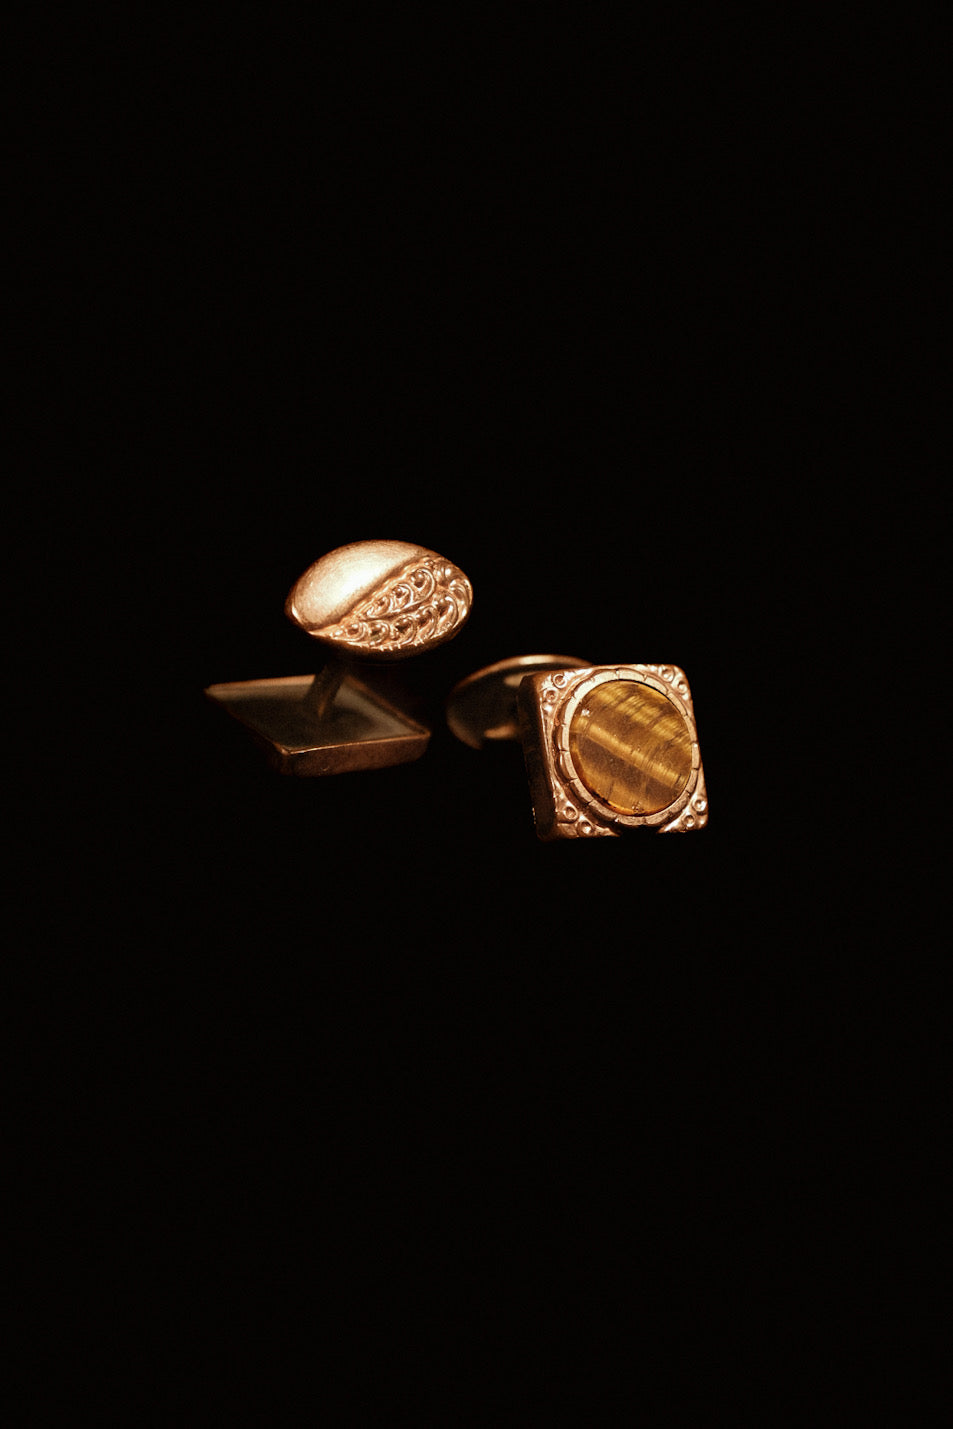 PAT'D MAY 7' 1895 Ornate Tiger Eye Cufflinks And Leaf Detailed Backs